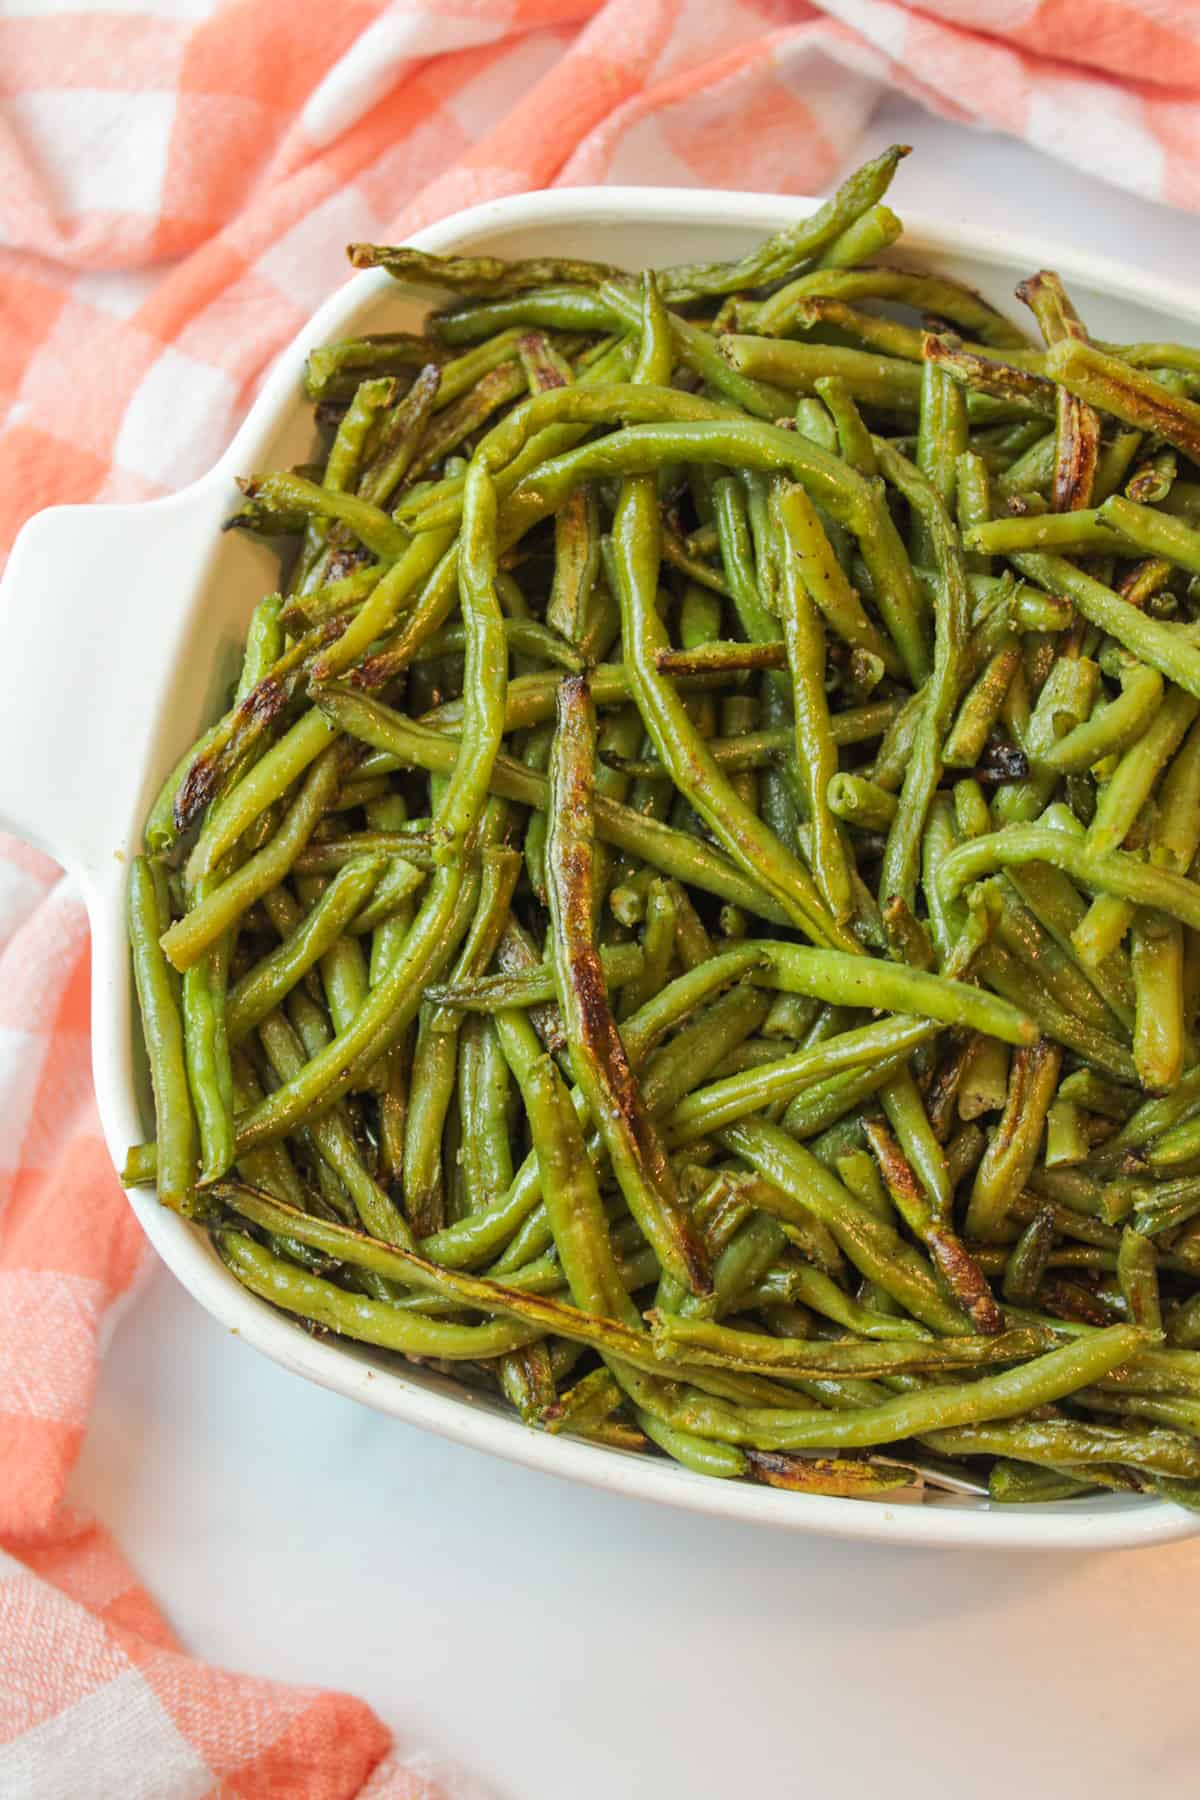 aerial view of an anlged baking dish filled with roasted green beans